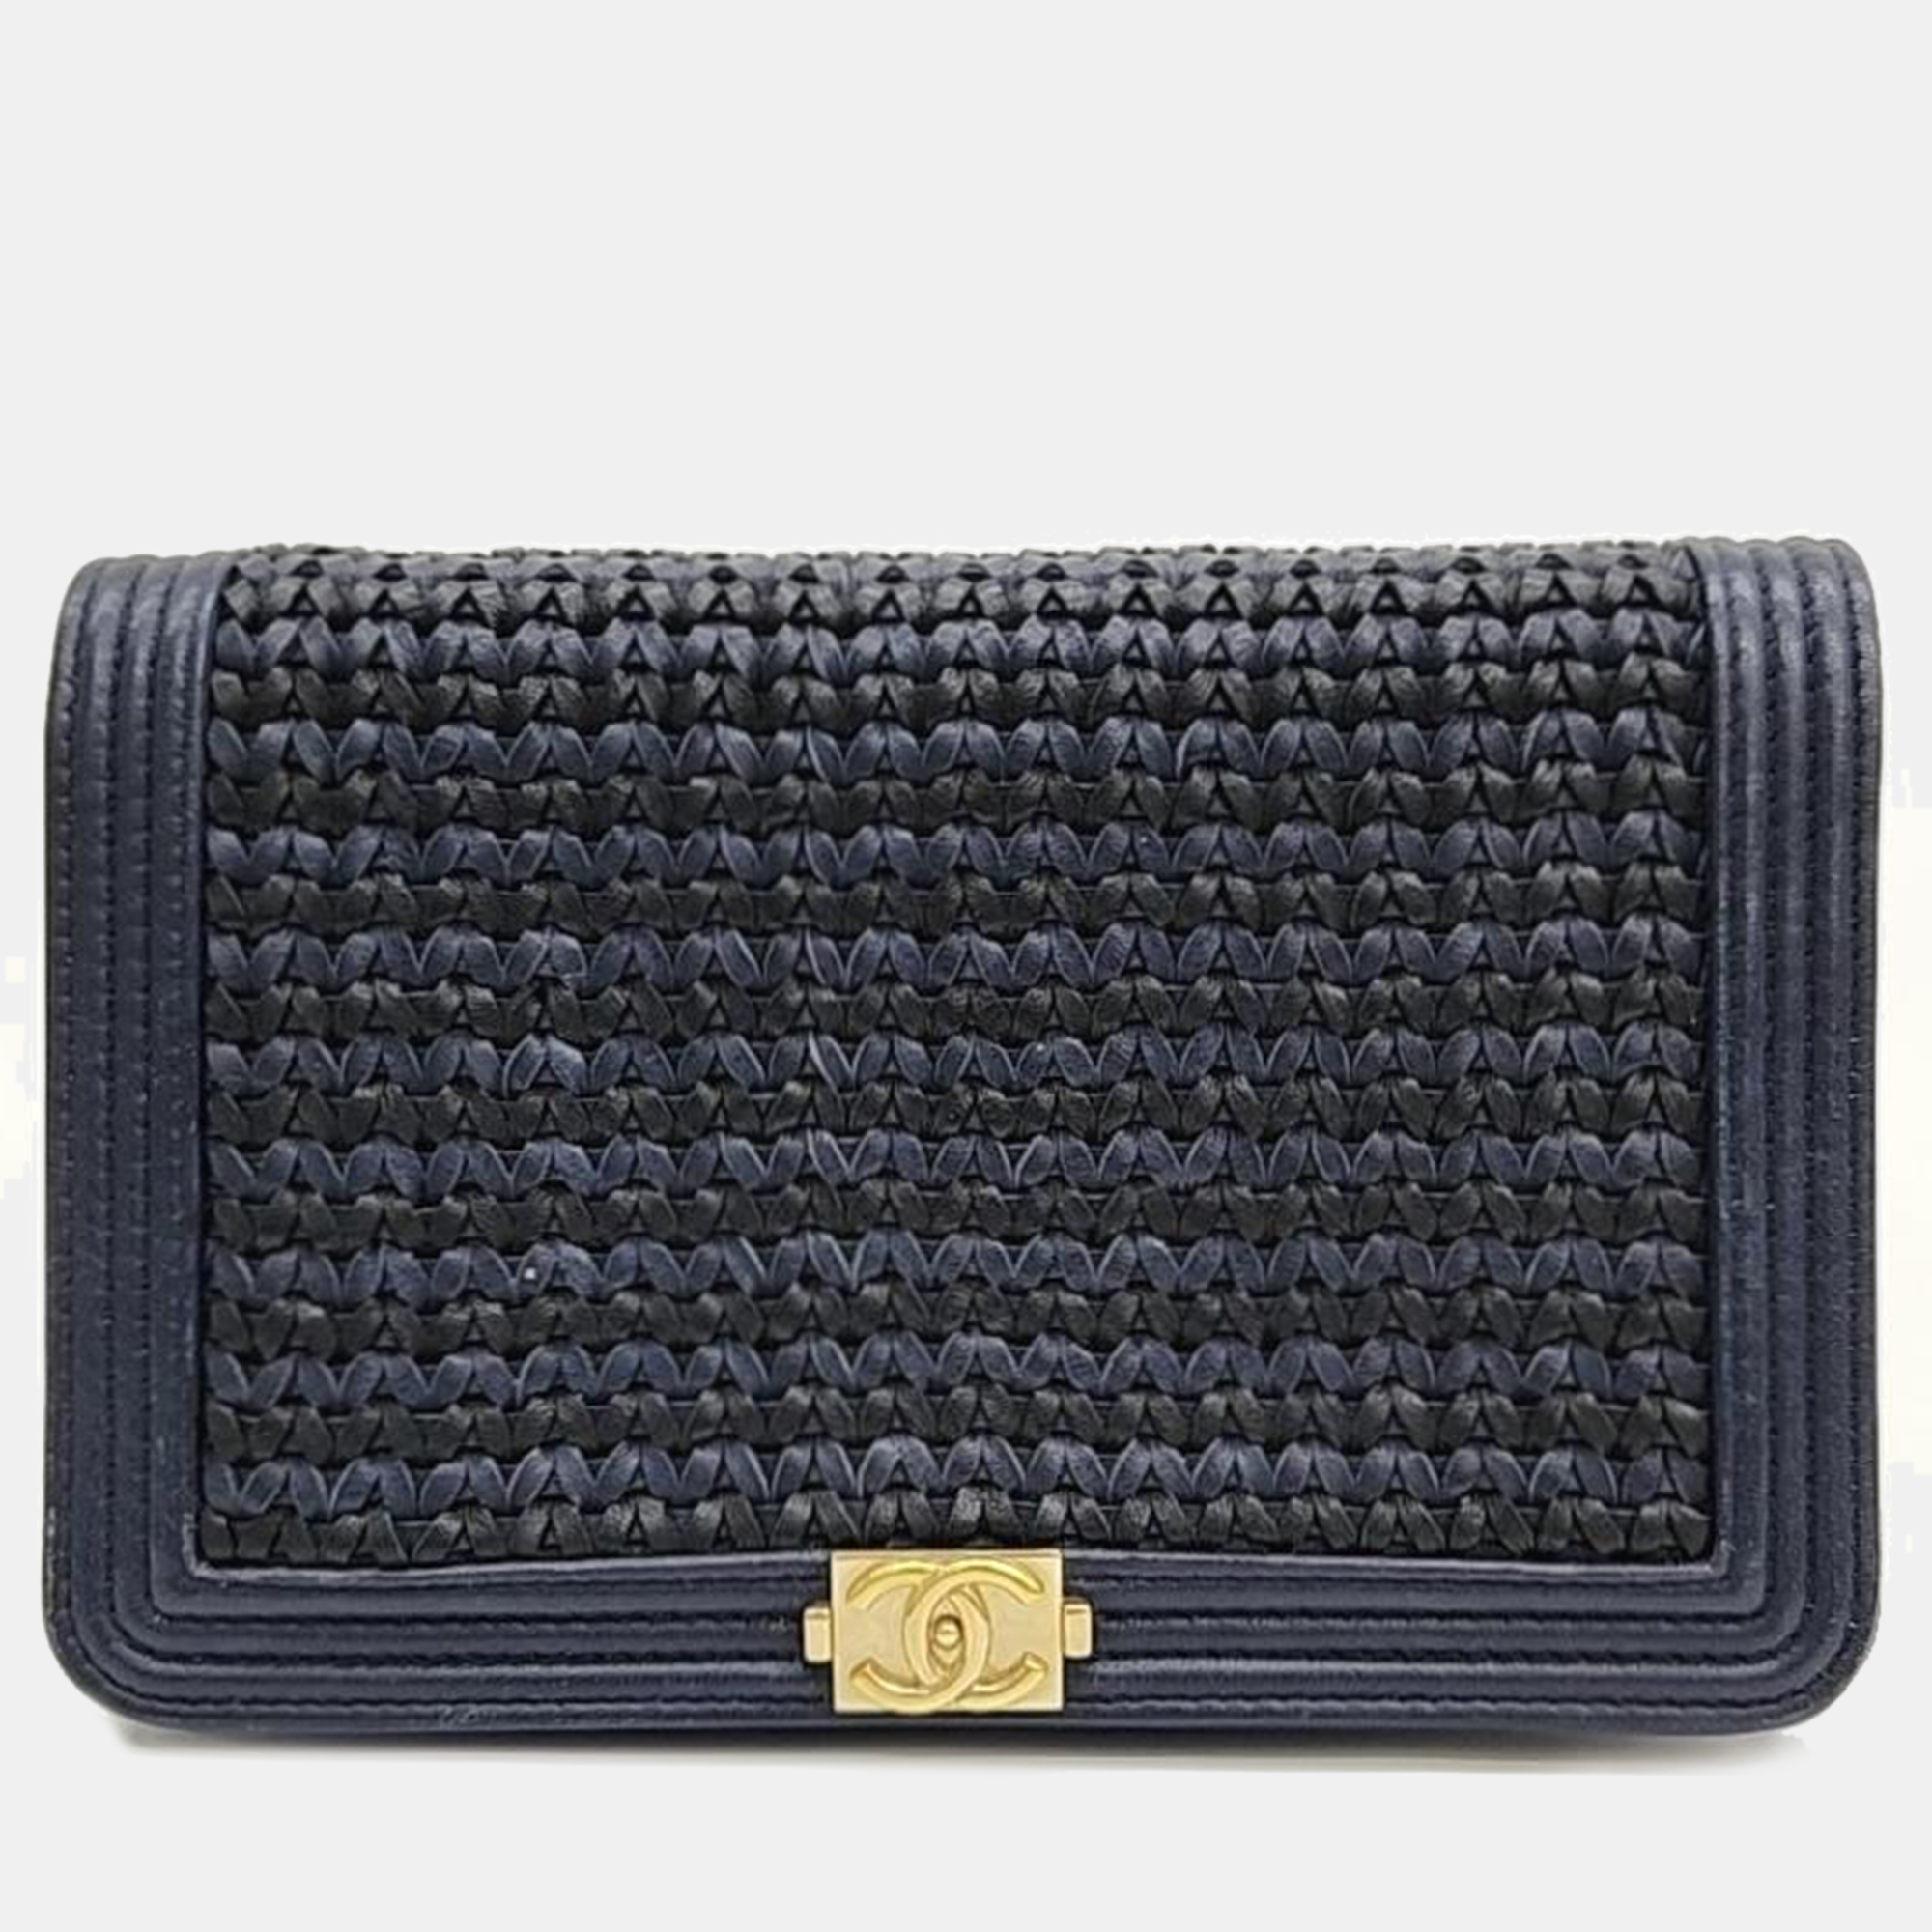 Chanel blue/gold woven leather new boy wallet on chain